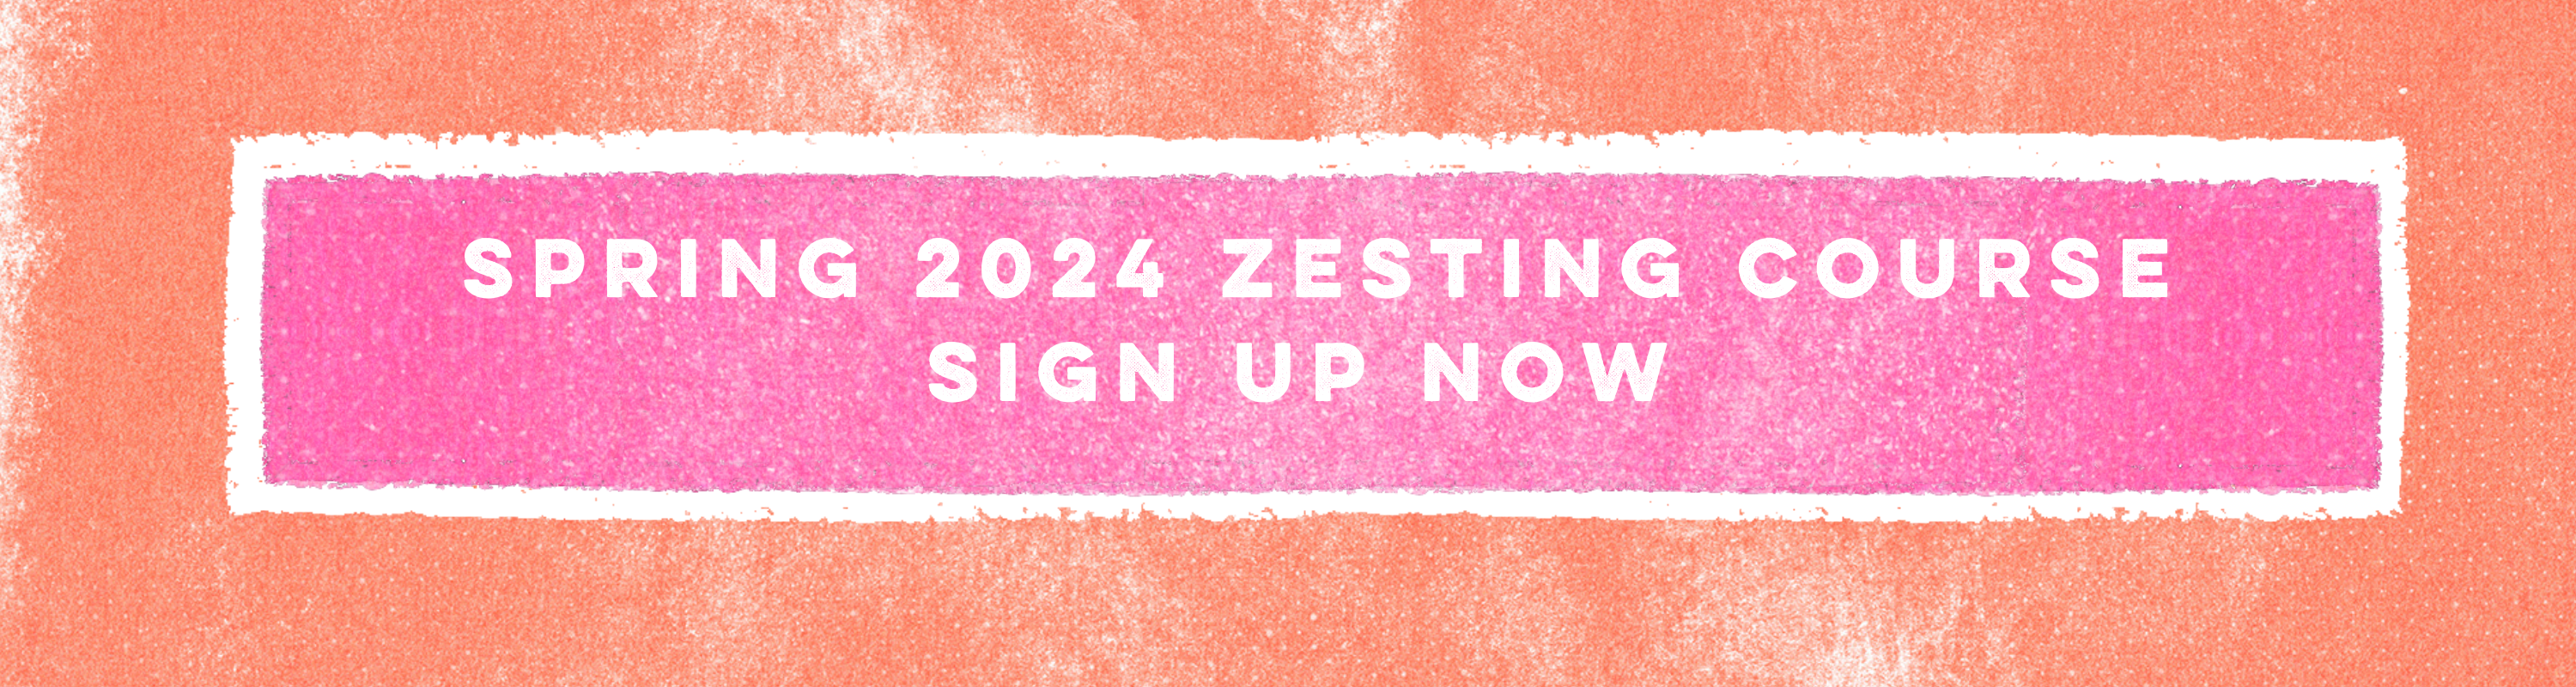 Spring 2024 zesting course sign up now